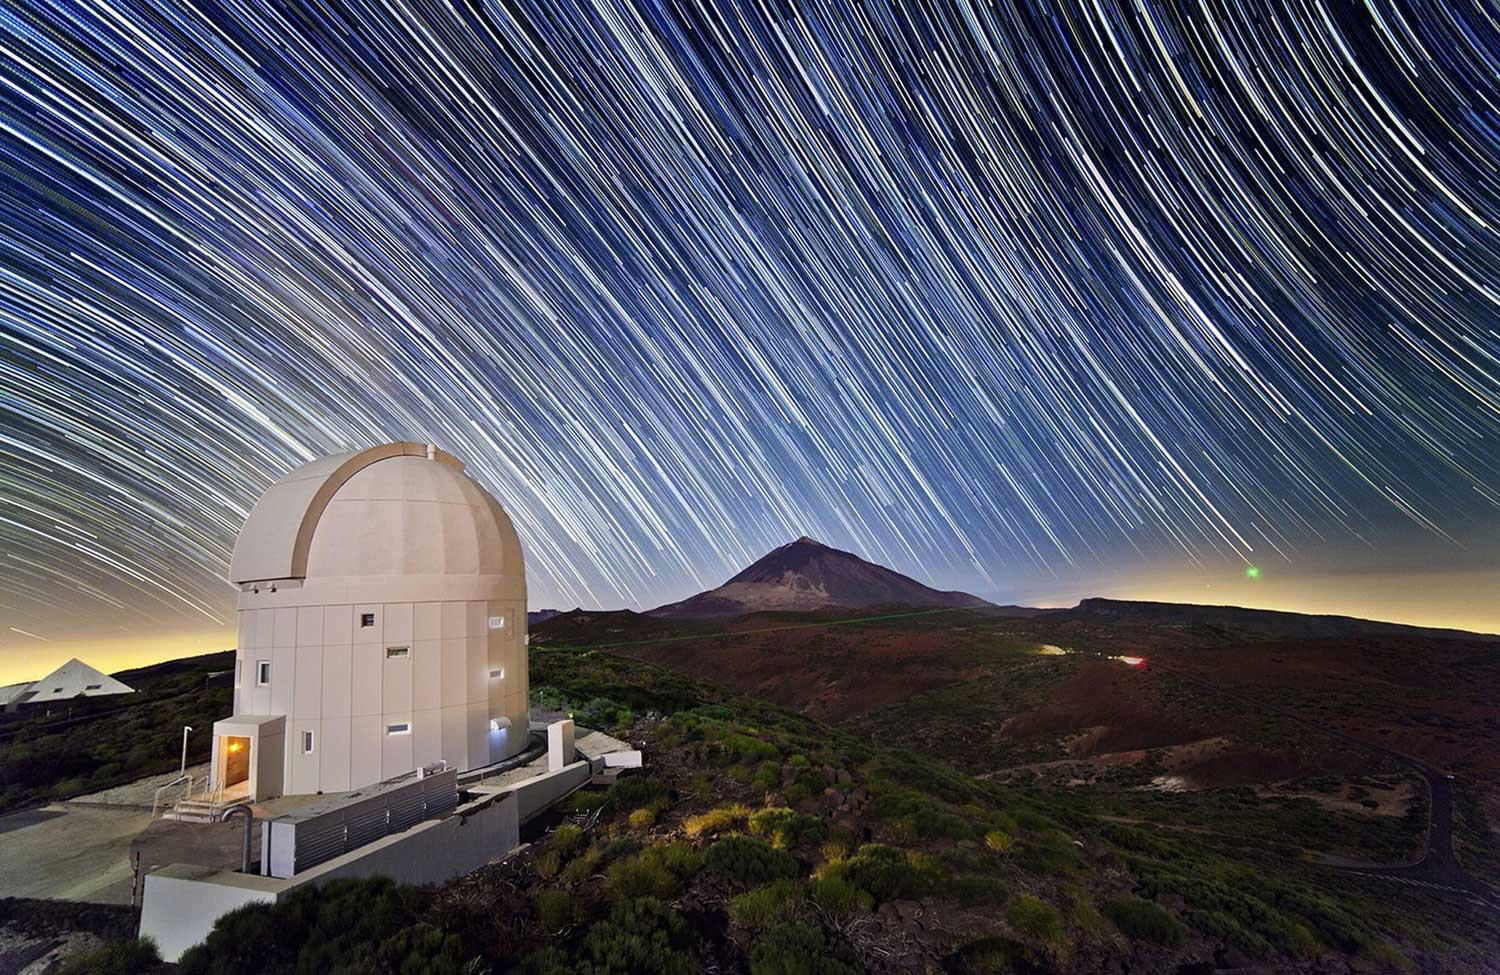 A long exposure of the European Space Agency's Optical Ground Station at the La Teide Observatory on the Canary Islands, Spain released on April 27, 2014.